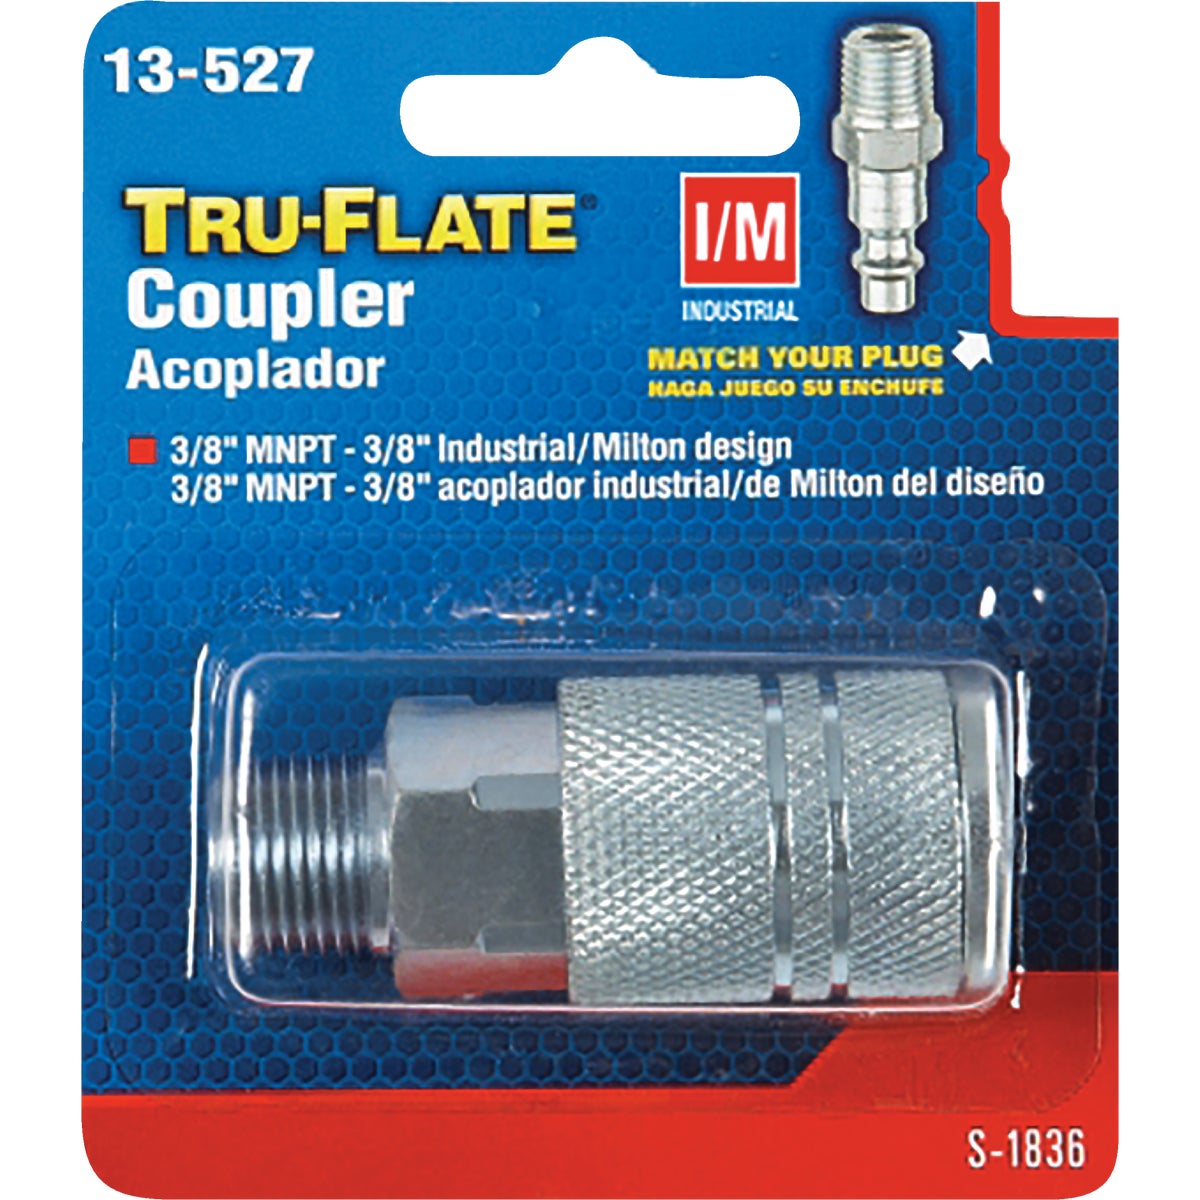 Item 570080, Air line coupler features 100% air-tight seal, accidental disconnect 